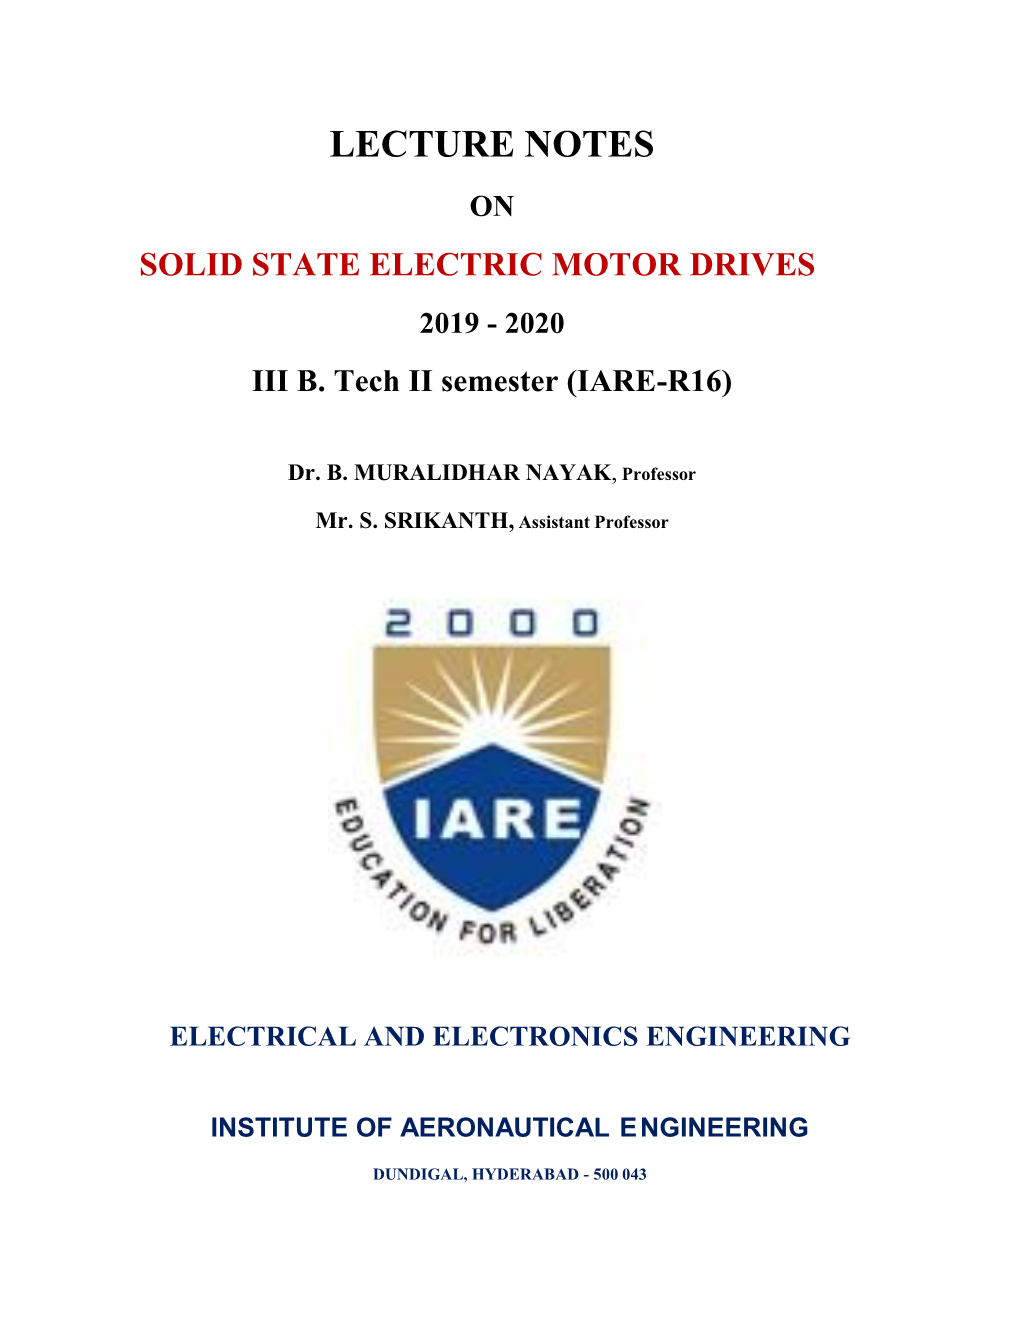 Lecture Notes on Solid State Electric Motor Drives 2019 - 2020 Iii B